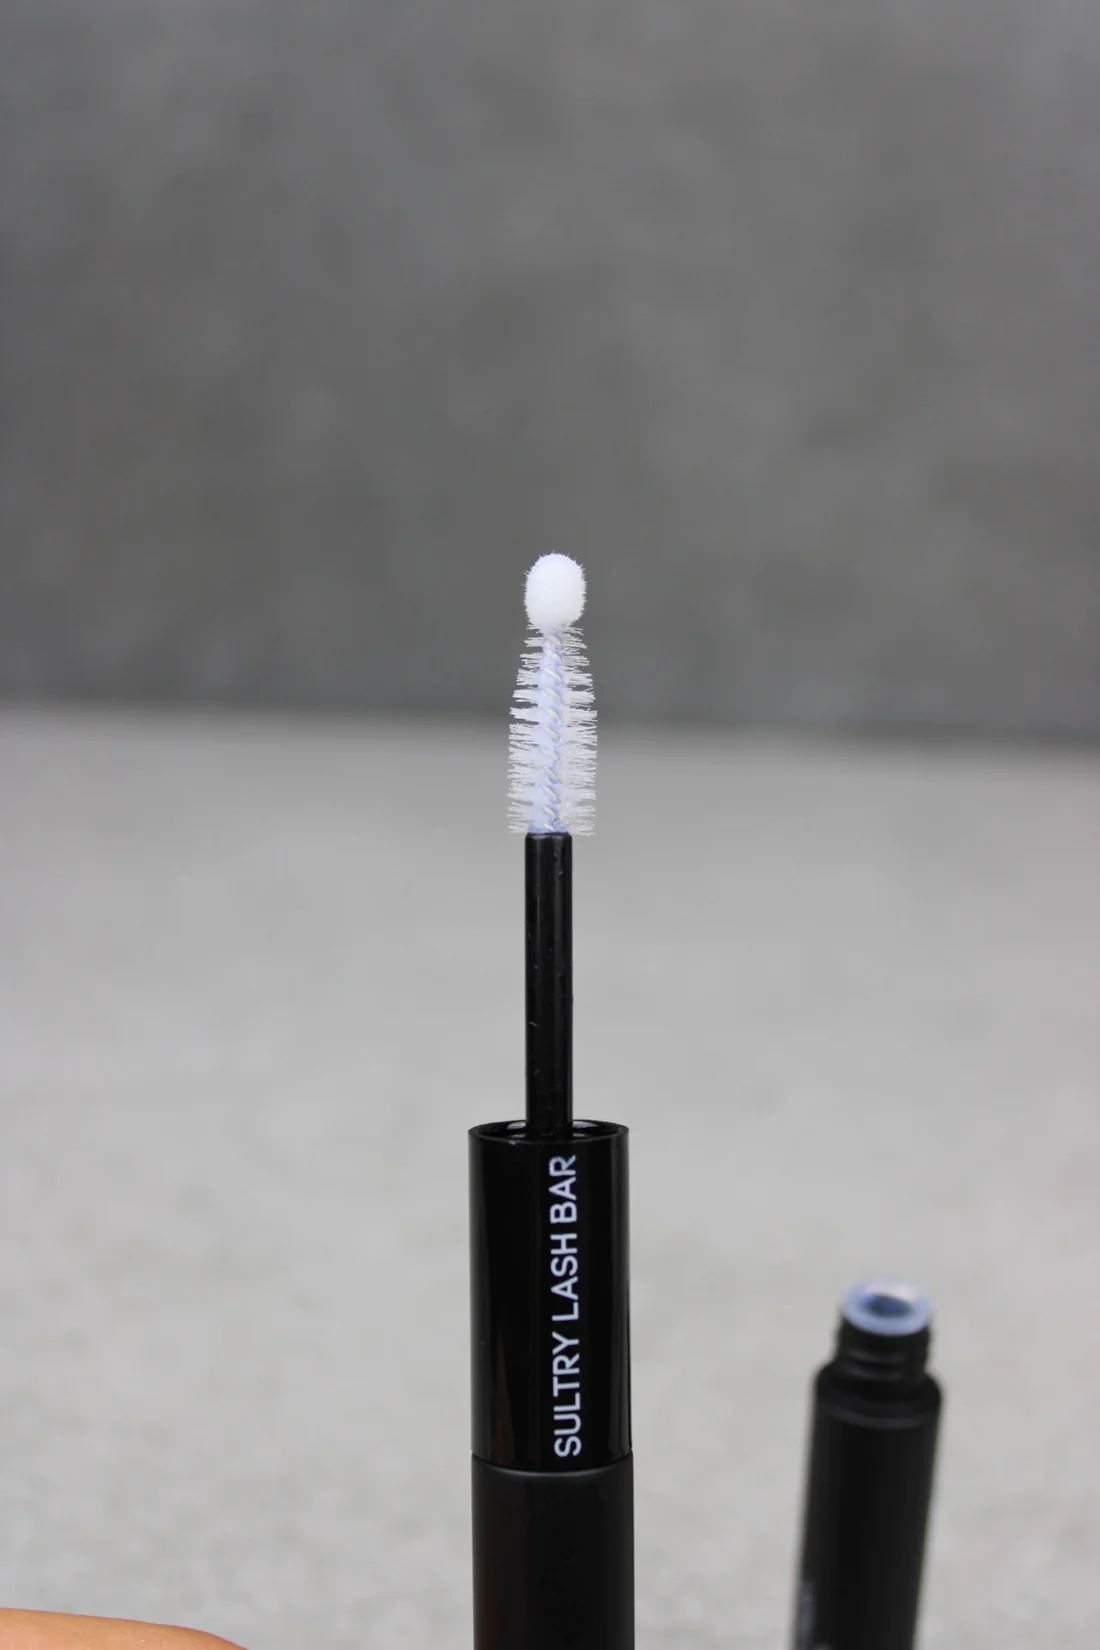 Sultry Lash Bar Bond and Seal